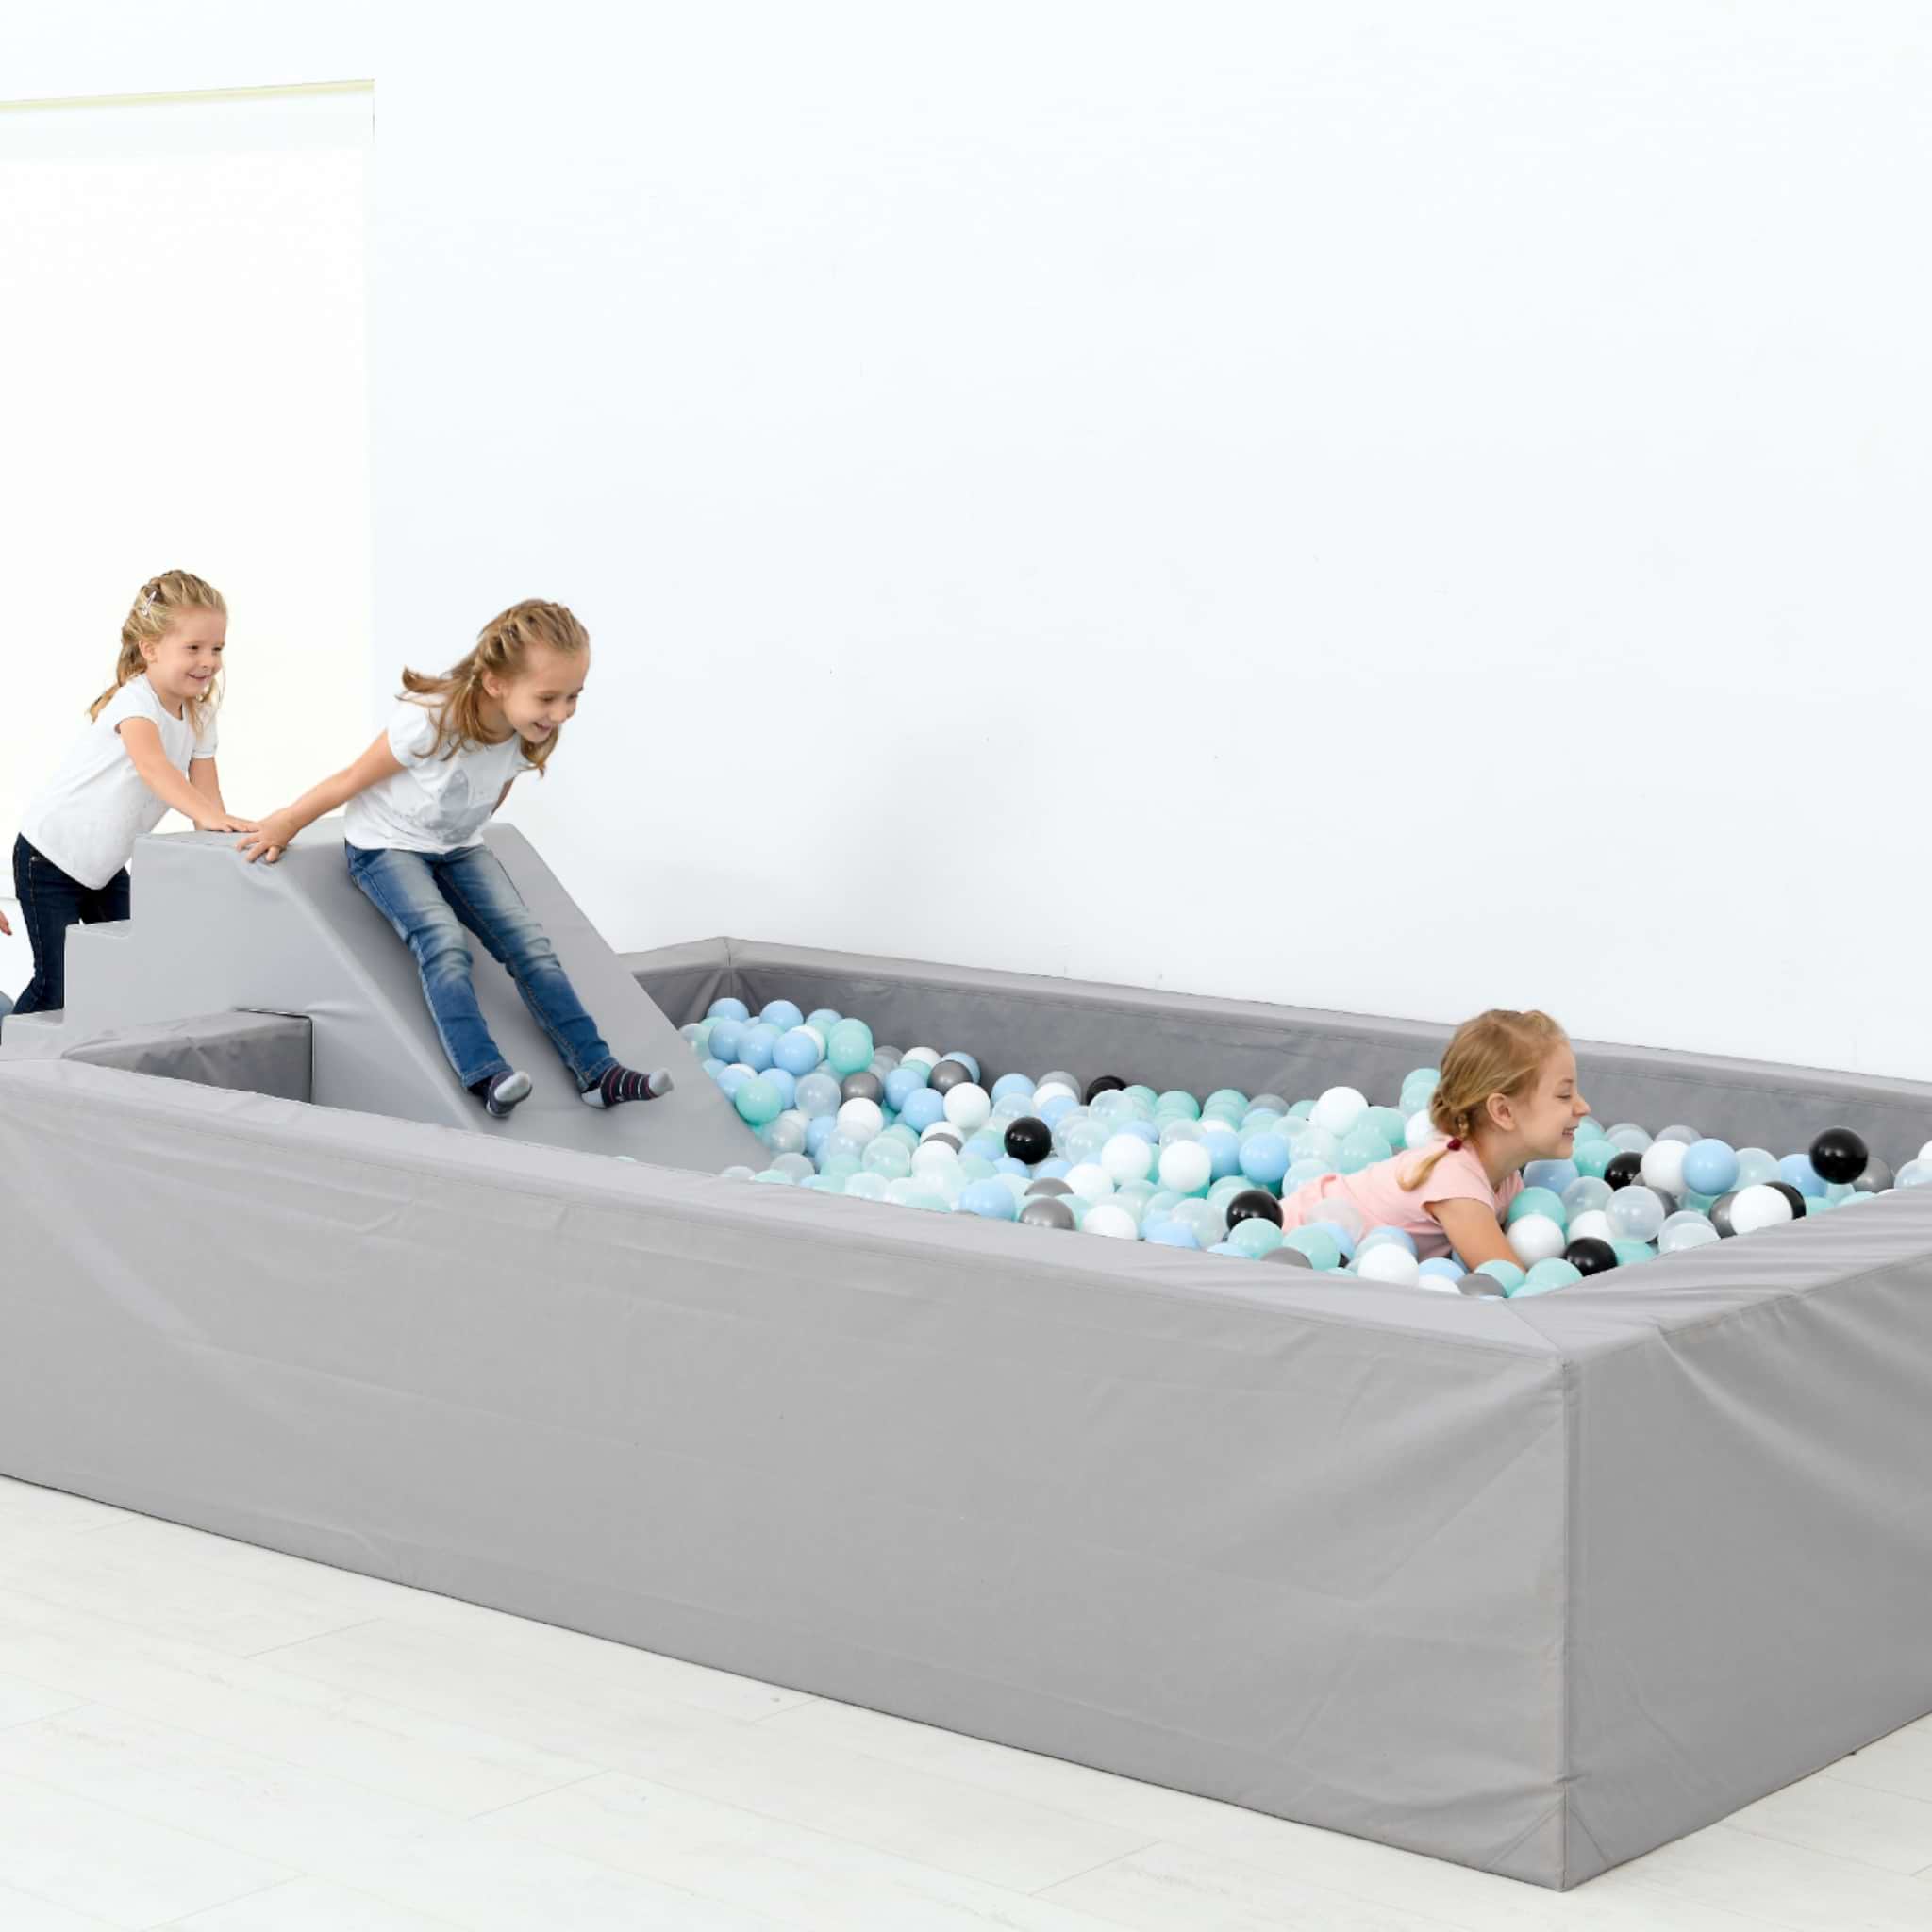 Steps with Slide for Ball Pool